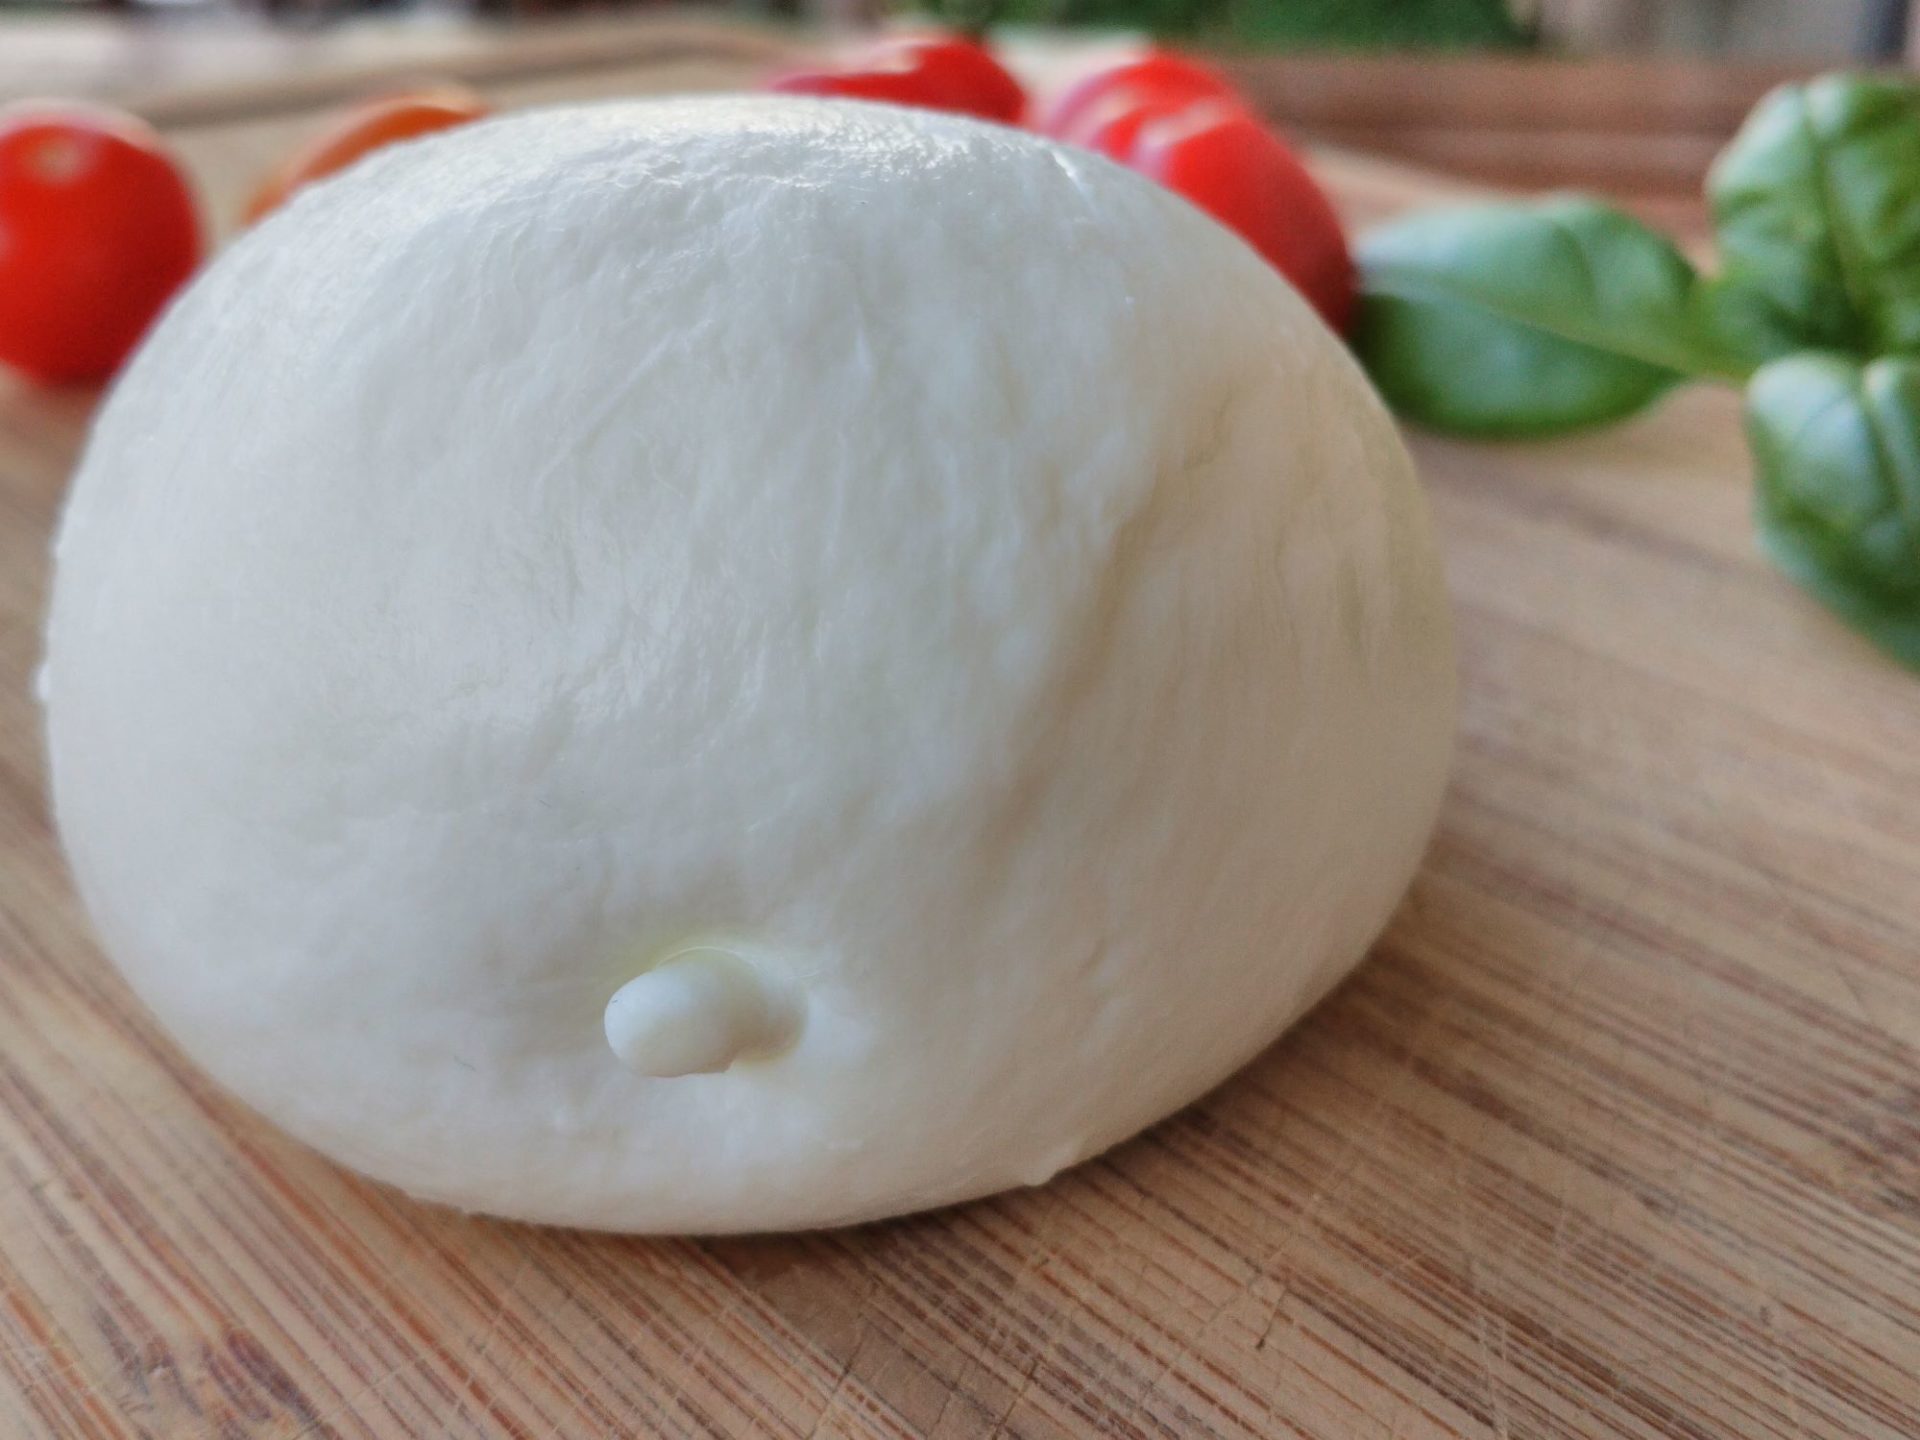 A ball of mozzarella cheese is siiting on a wooden counterop, with red tomatoes and green basil leaves in the background.